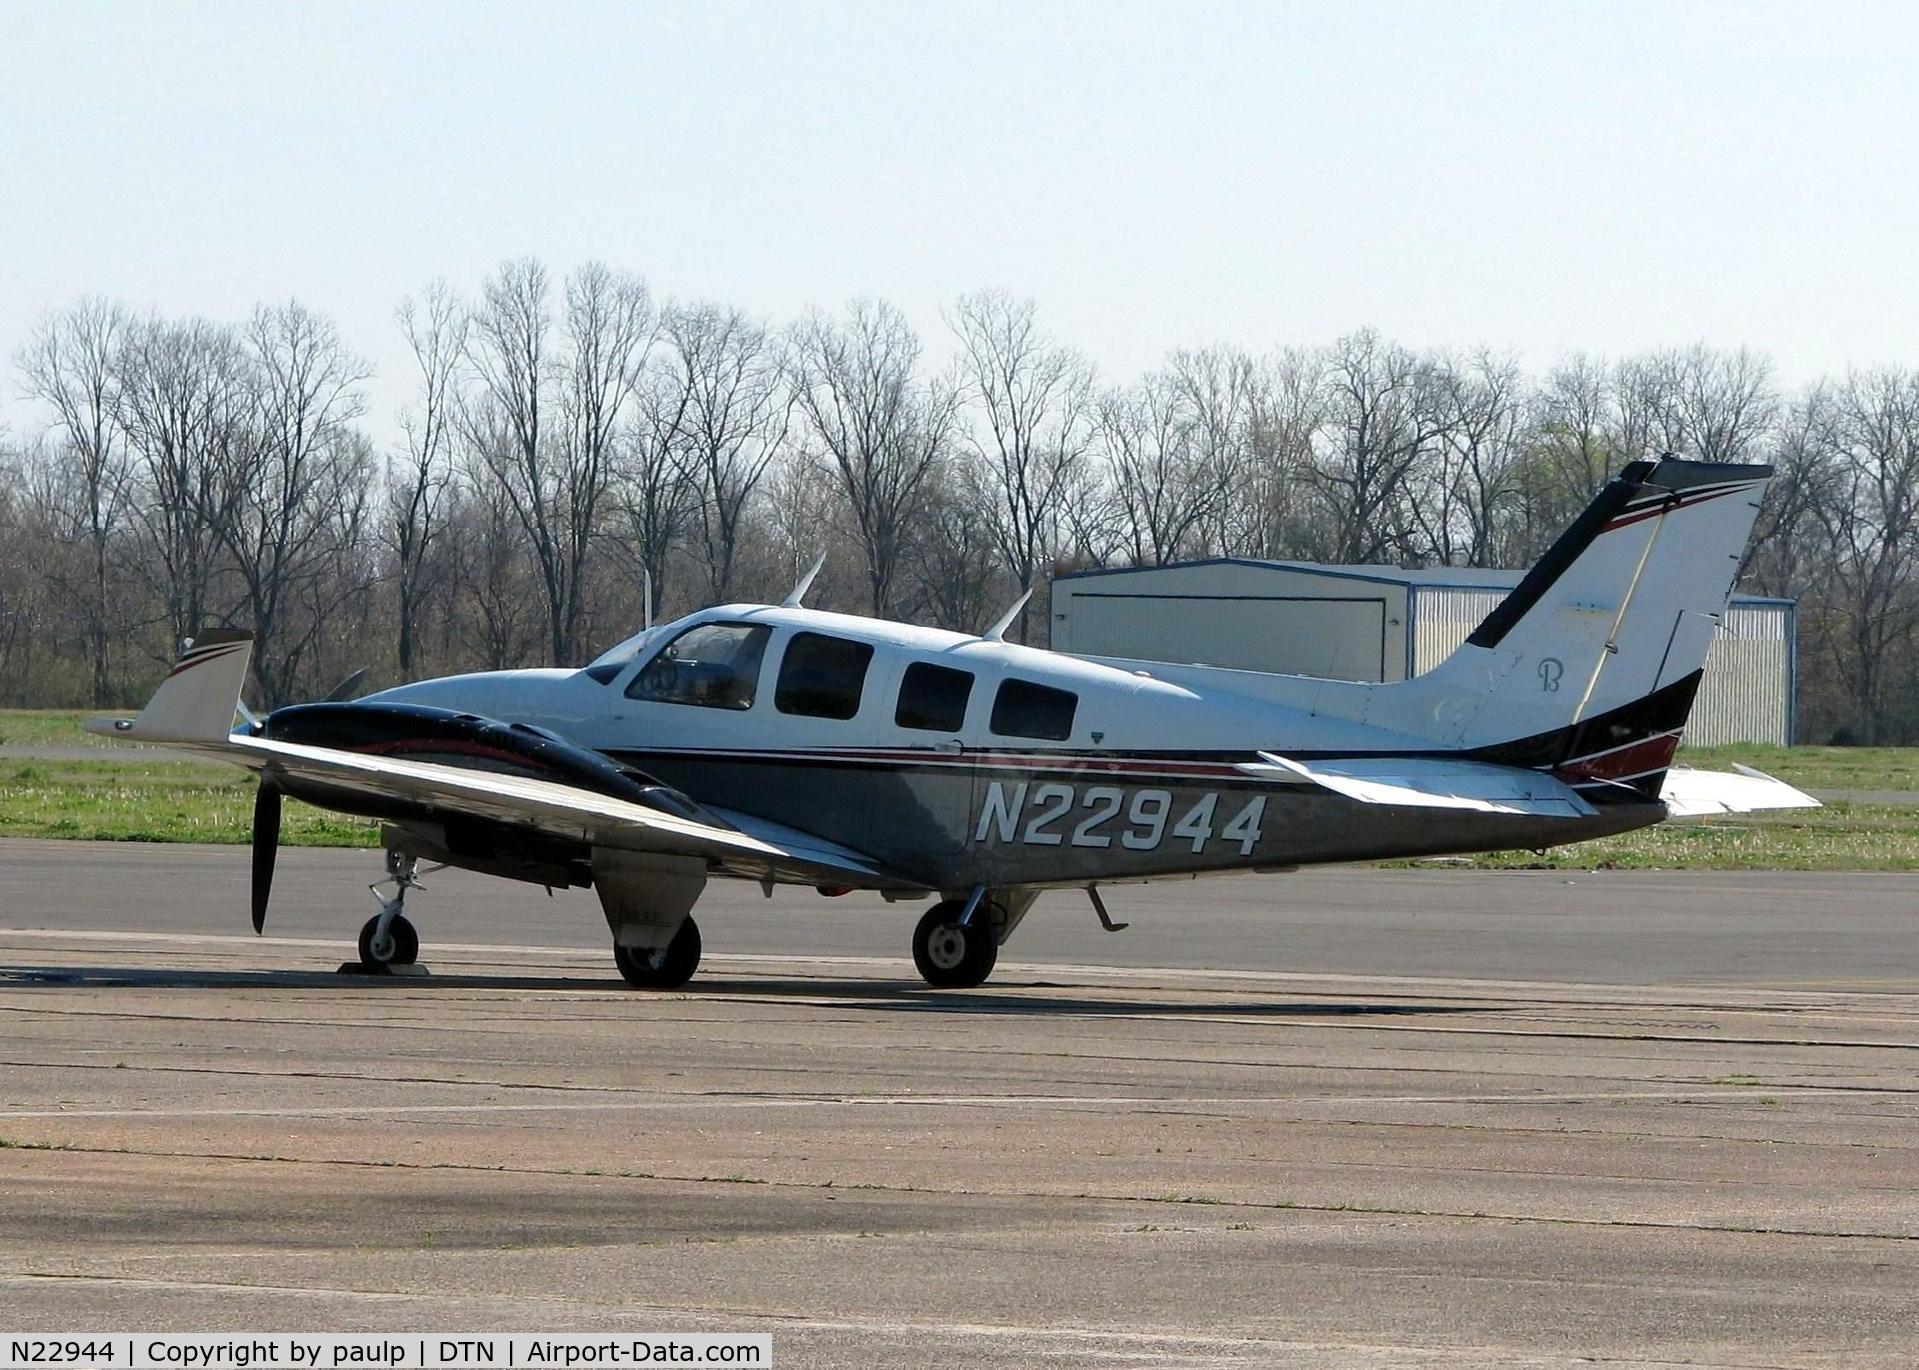 N22944, 1977 Beech 58P Baron C/N TJ-127, Parked at Downtown Shreveport.